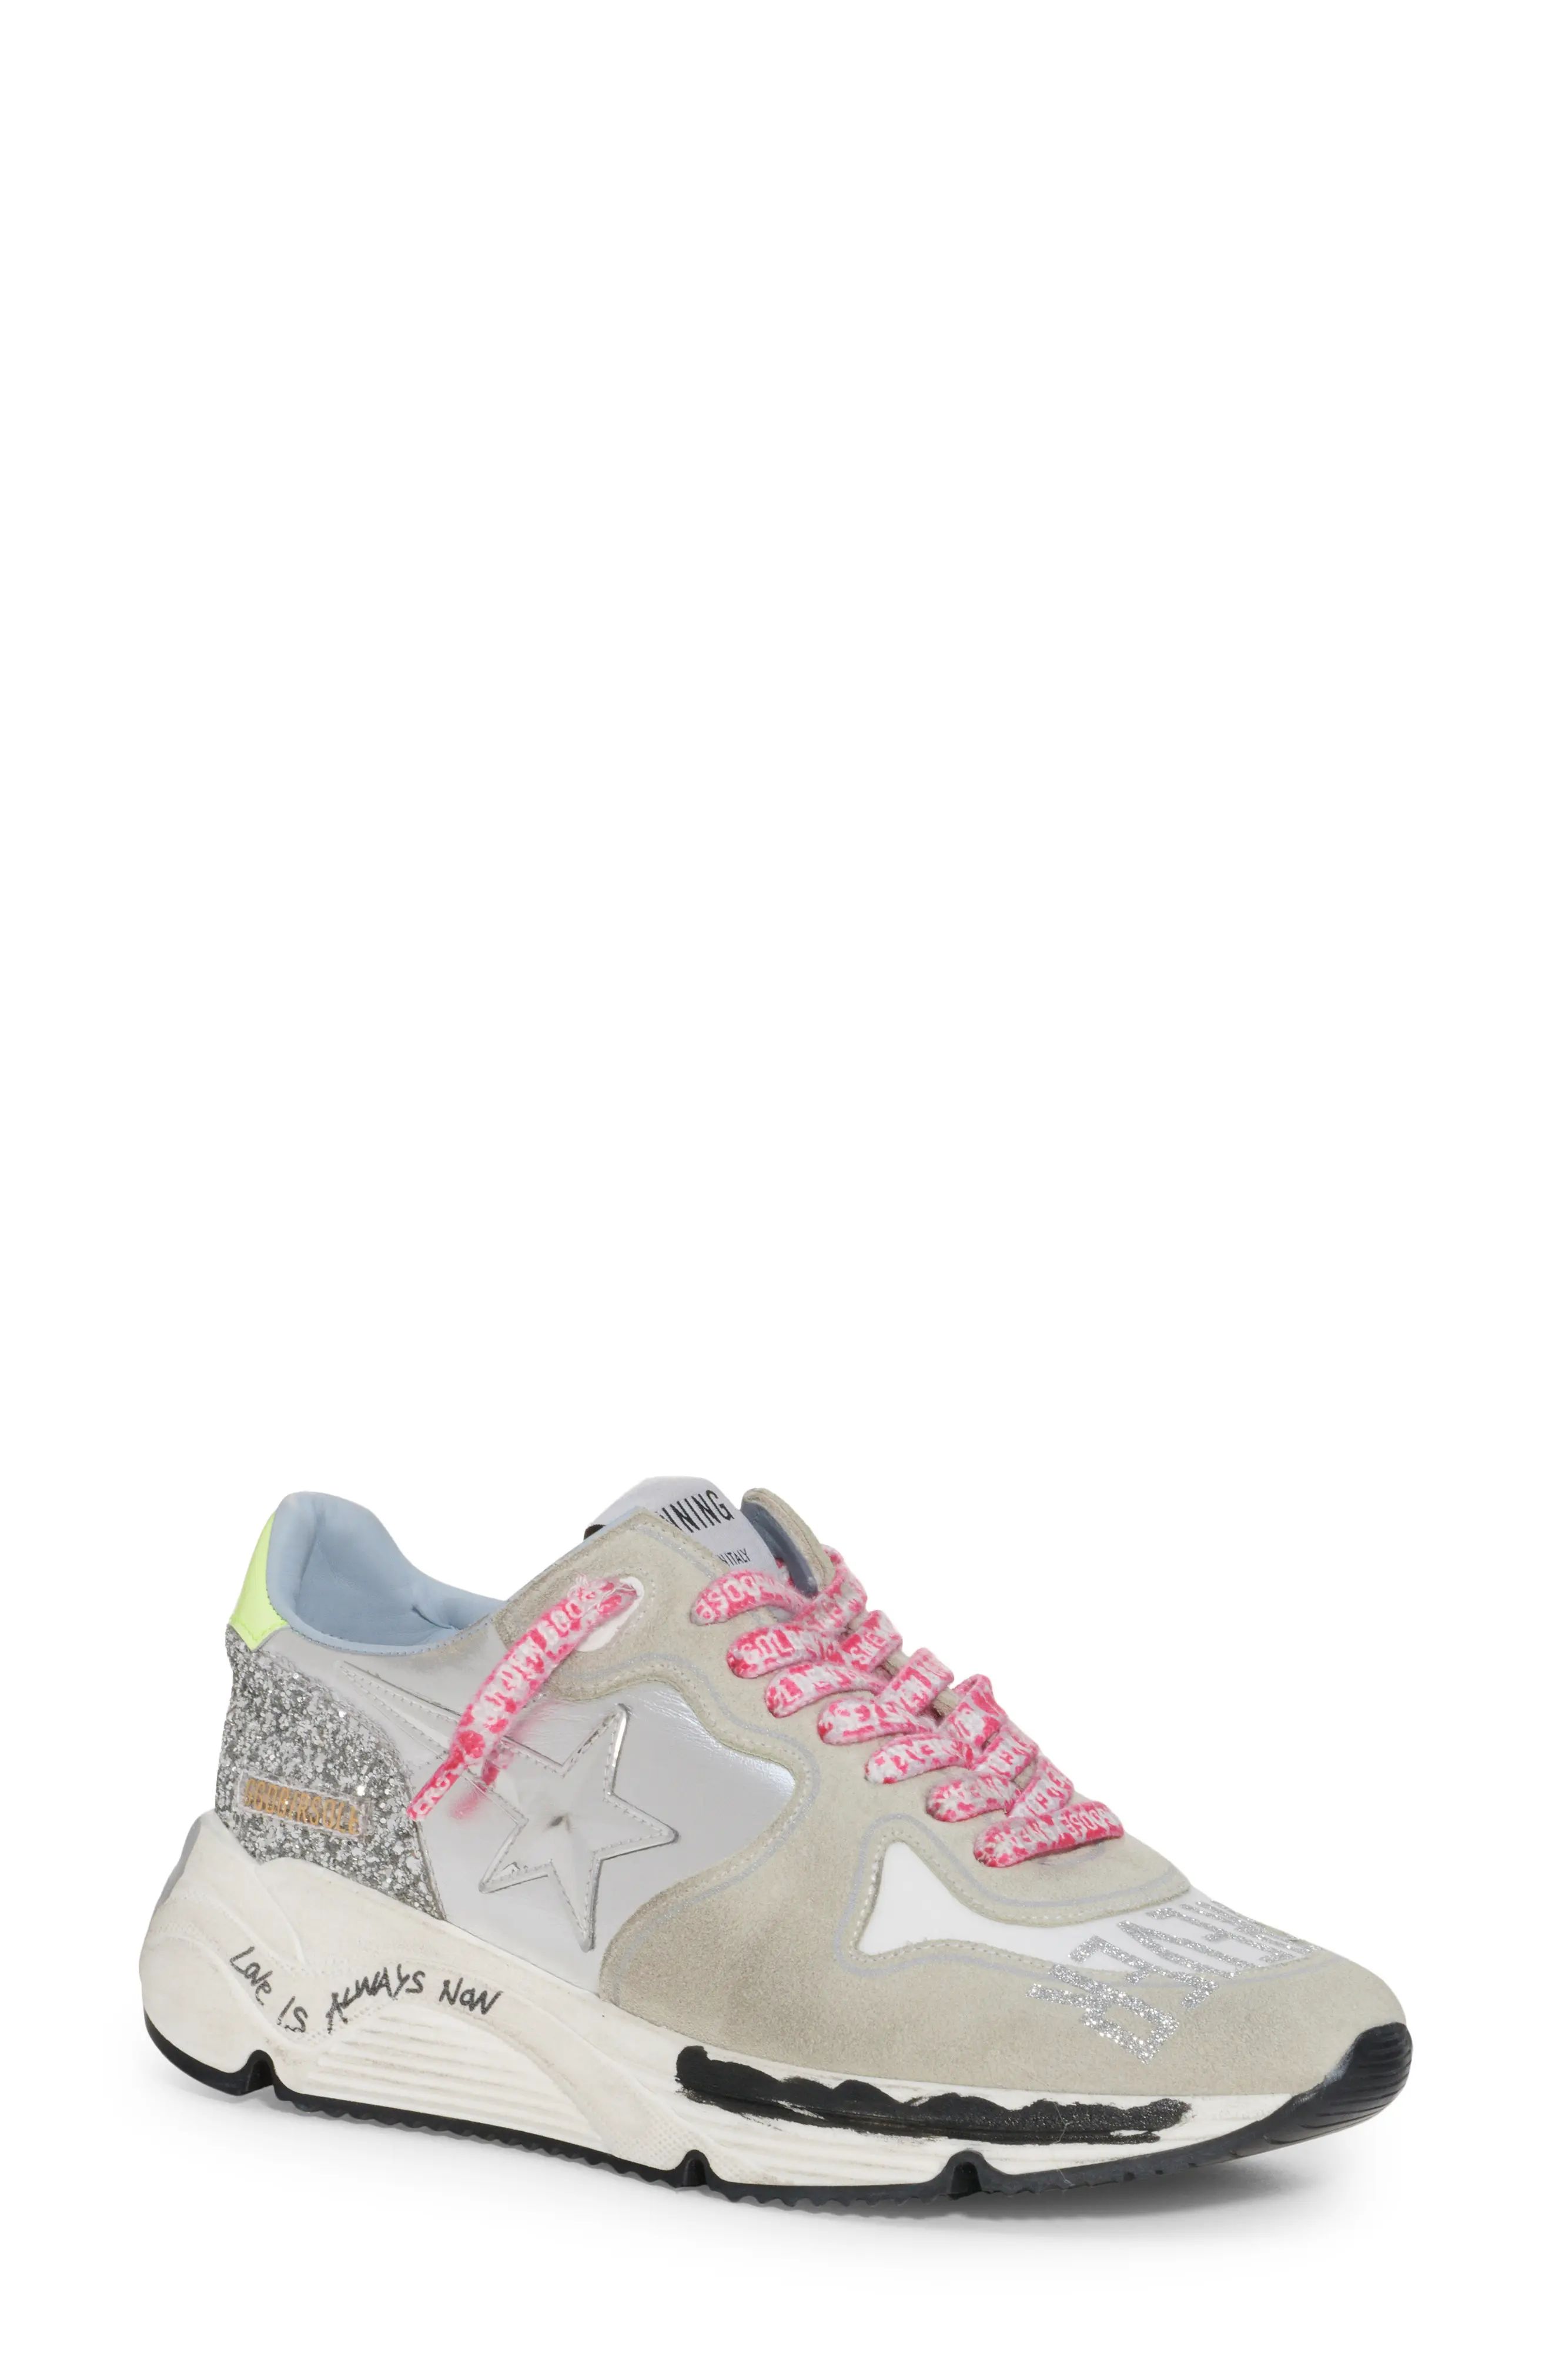 Golden Goose Running Sole Sneaker in Silver/Ice/White/Yellow at Nordstrom, Size 11Us | Nordstrom